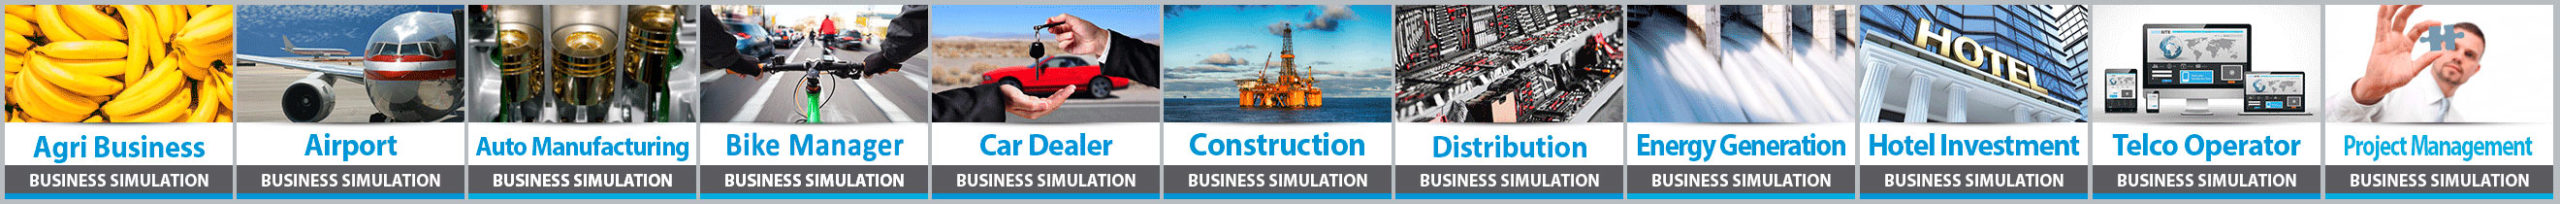 Industry Specific Business Simulations from IndustryMasters